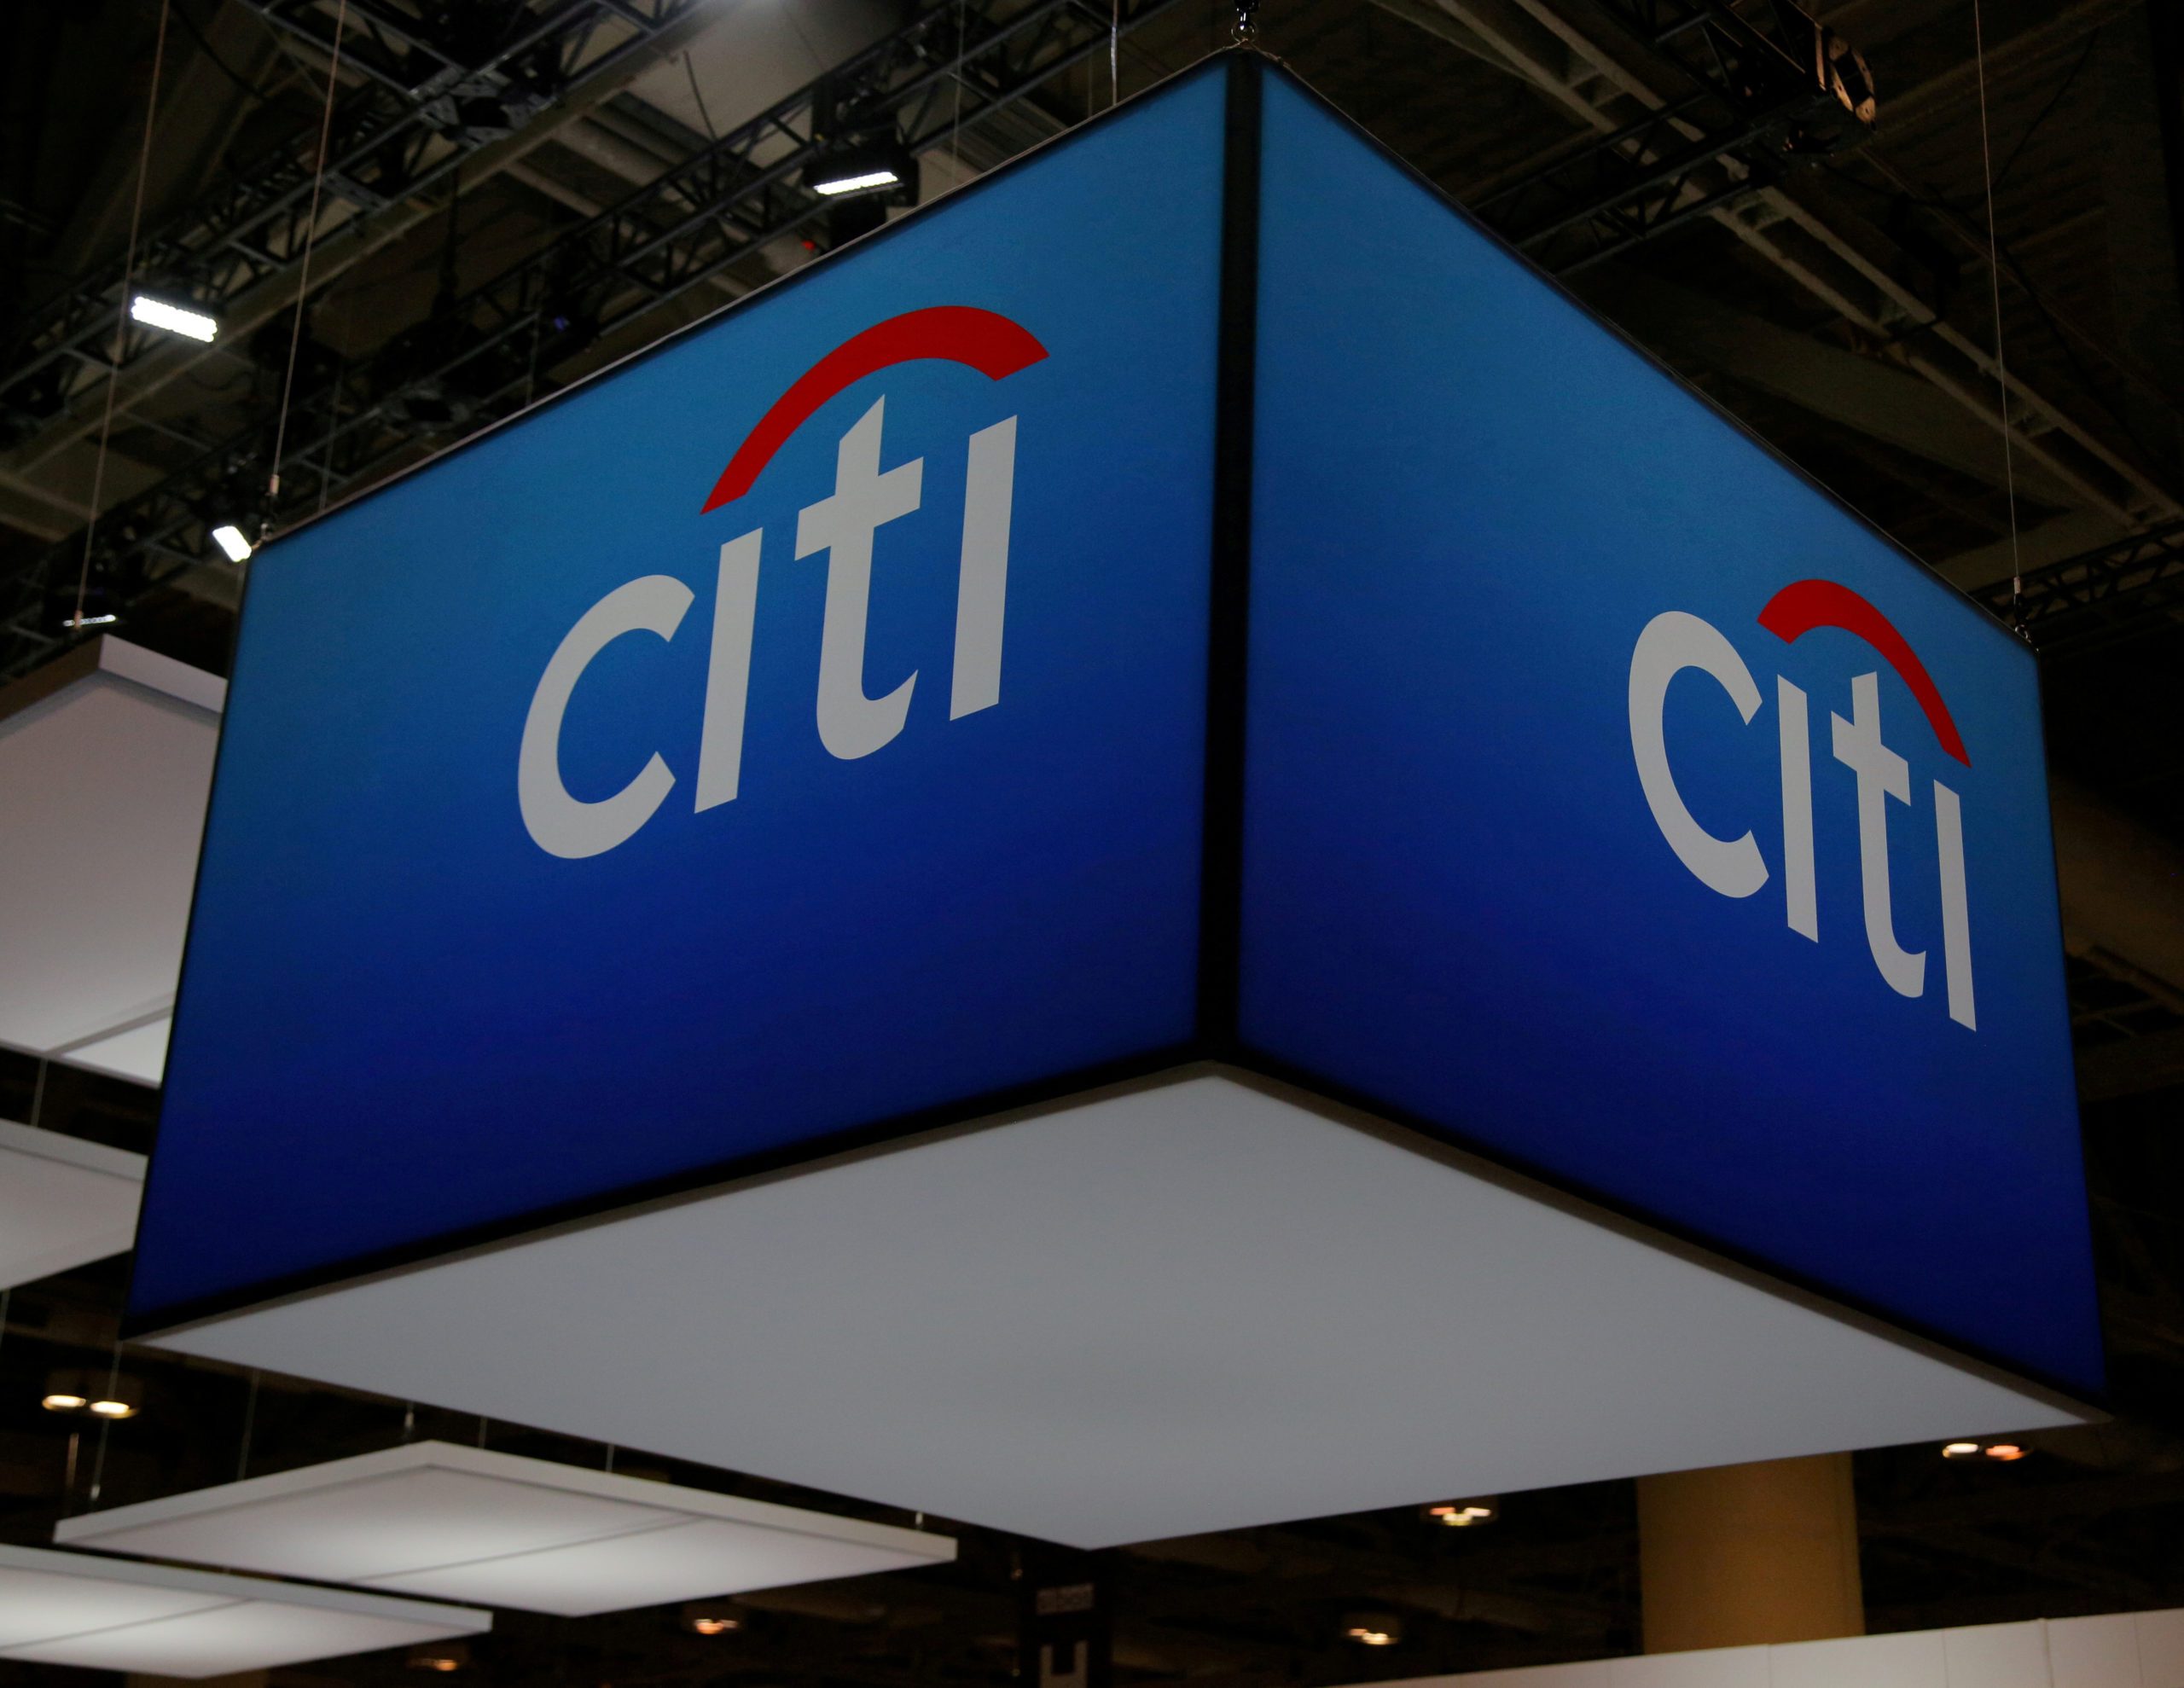 US banking giant Citigroup starts layoff talks after management overhaul